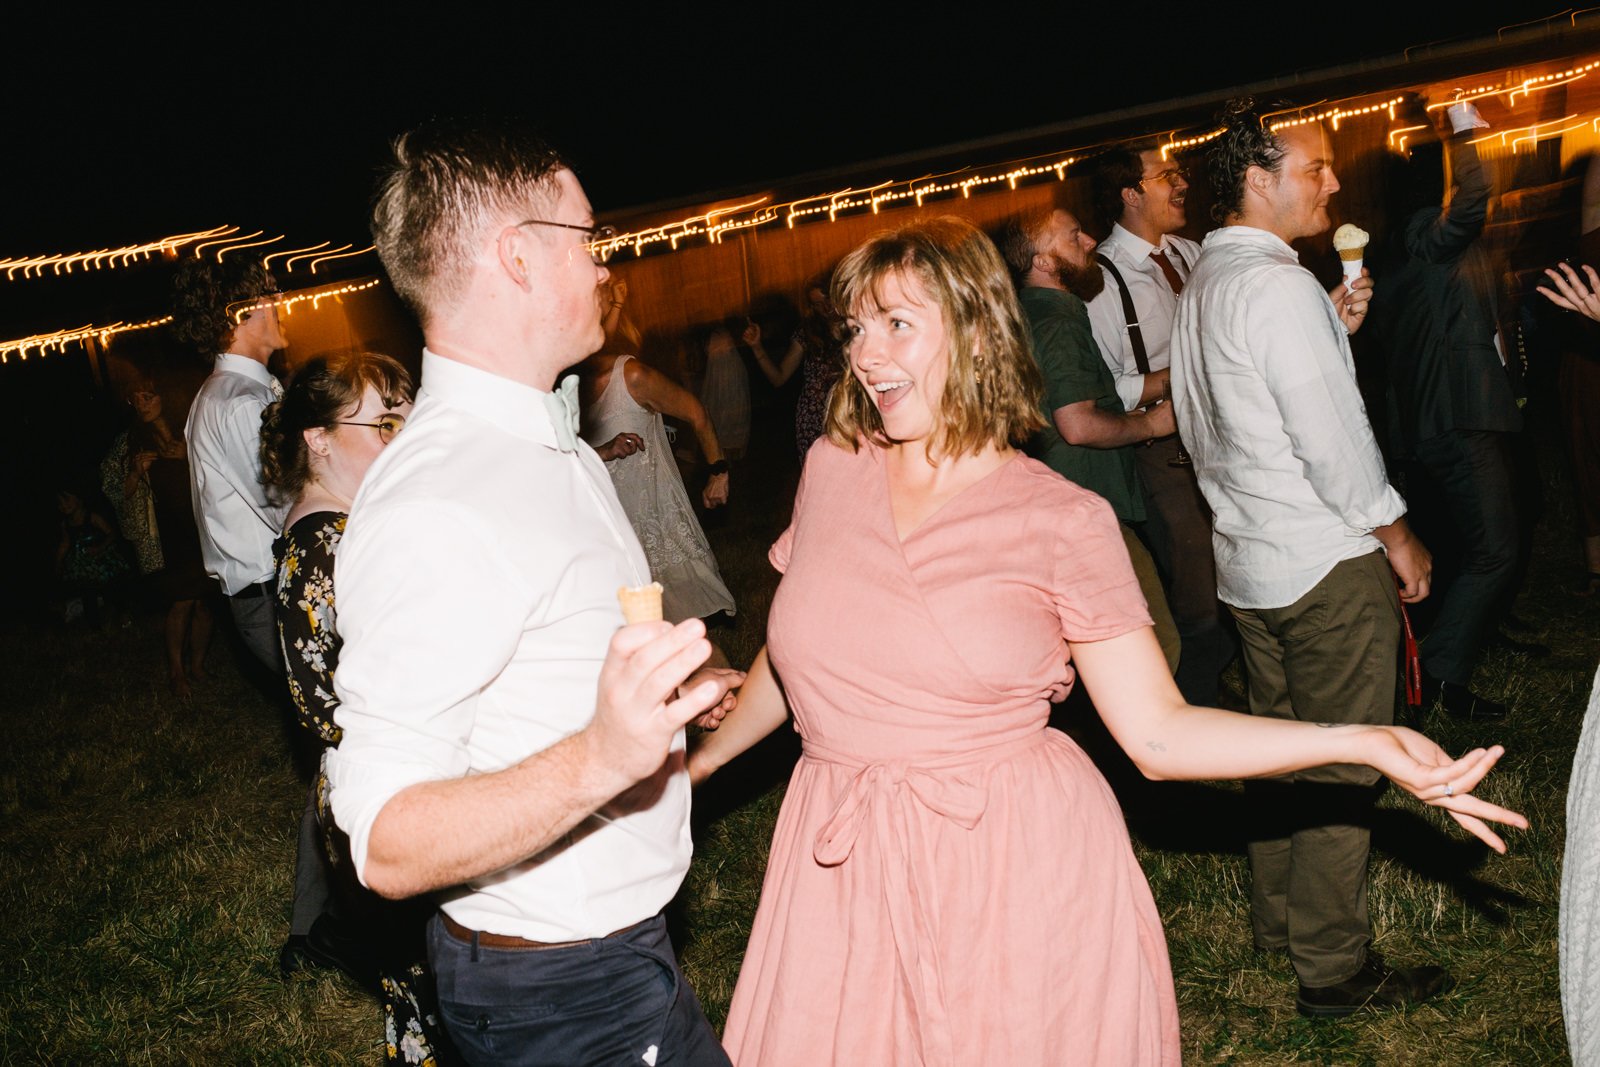  Couple dances together in pink dress at reception party 